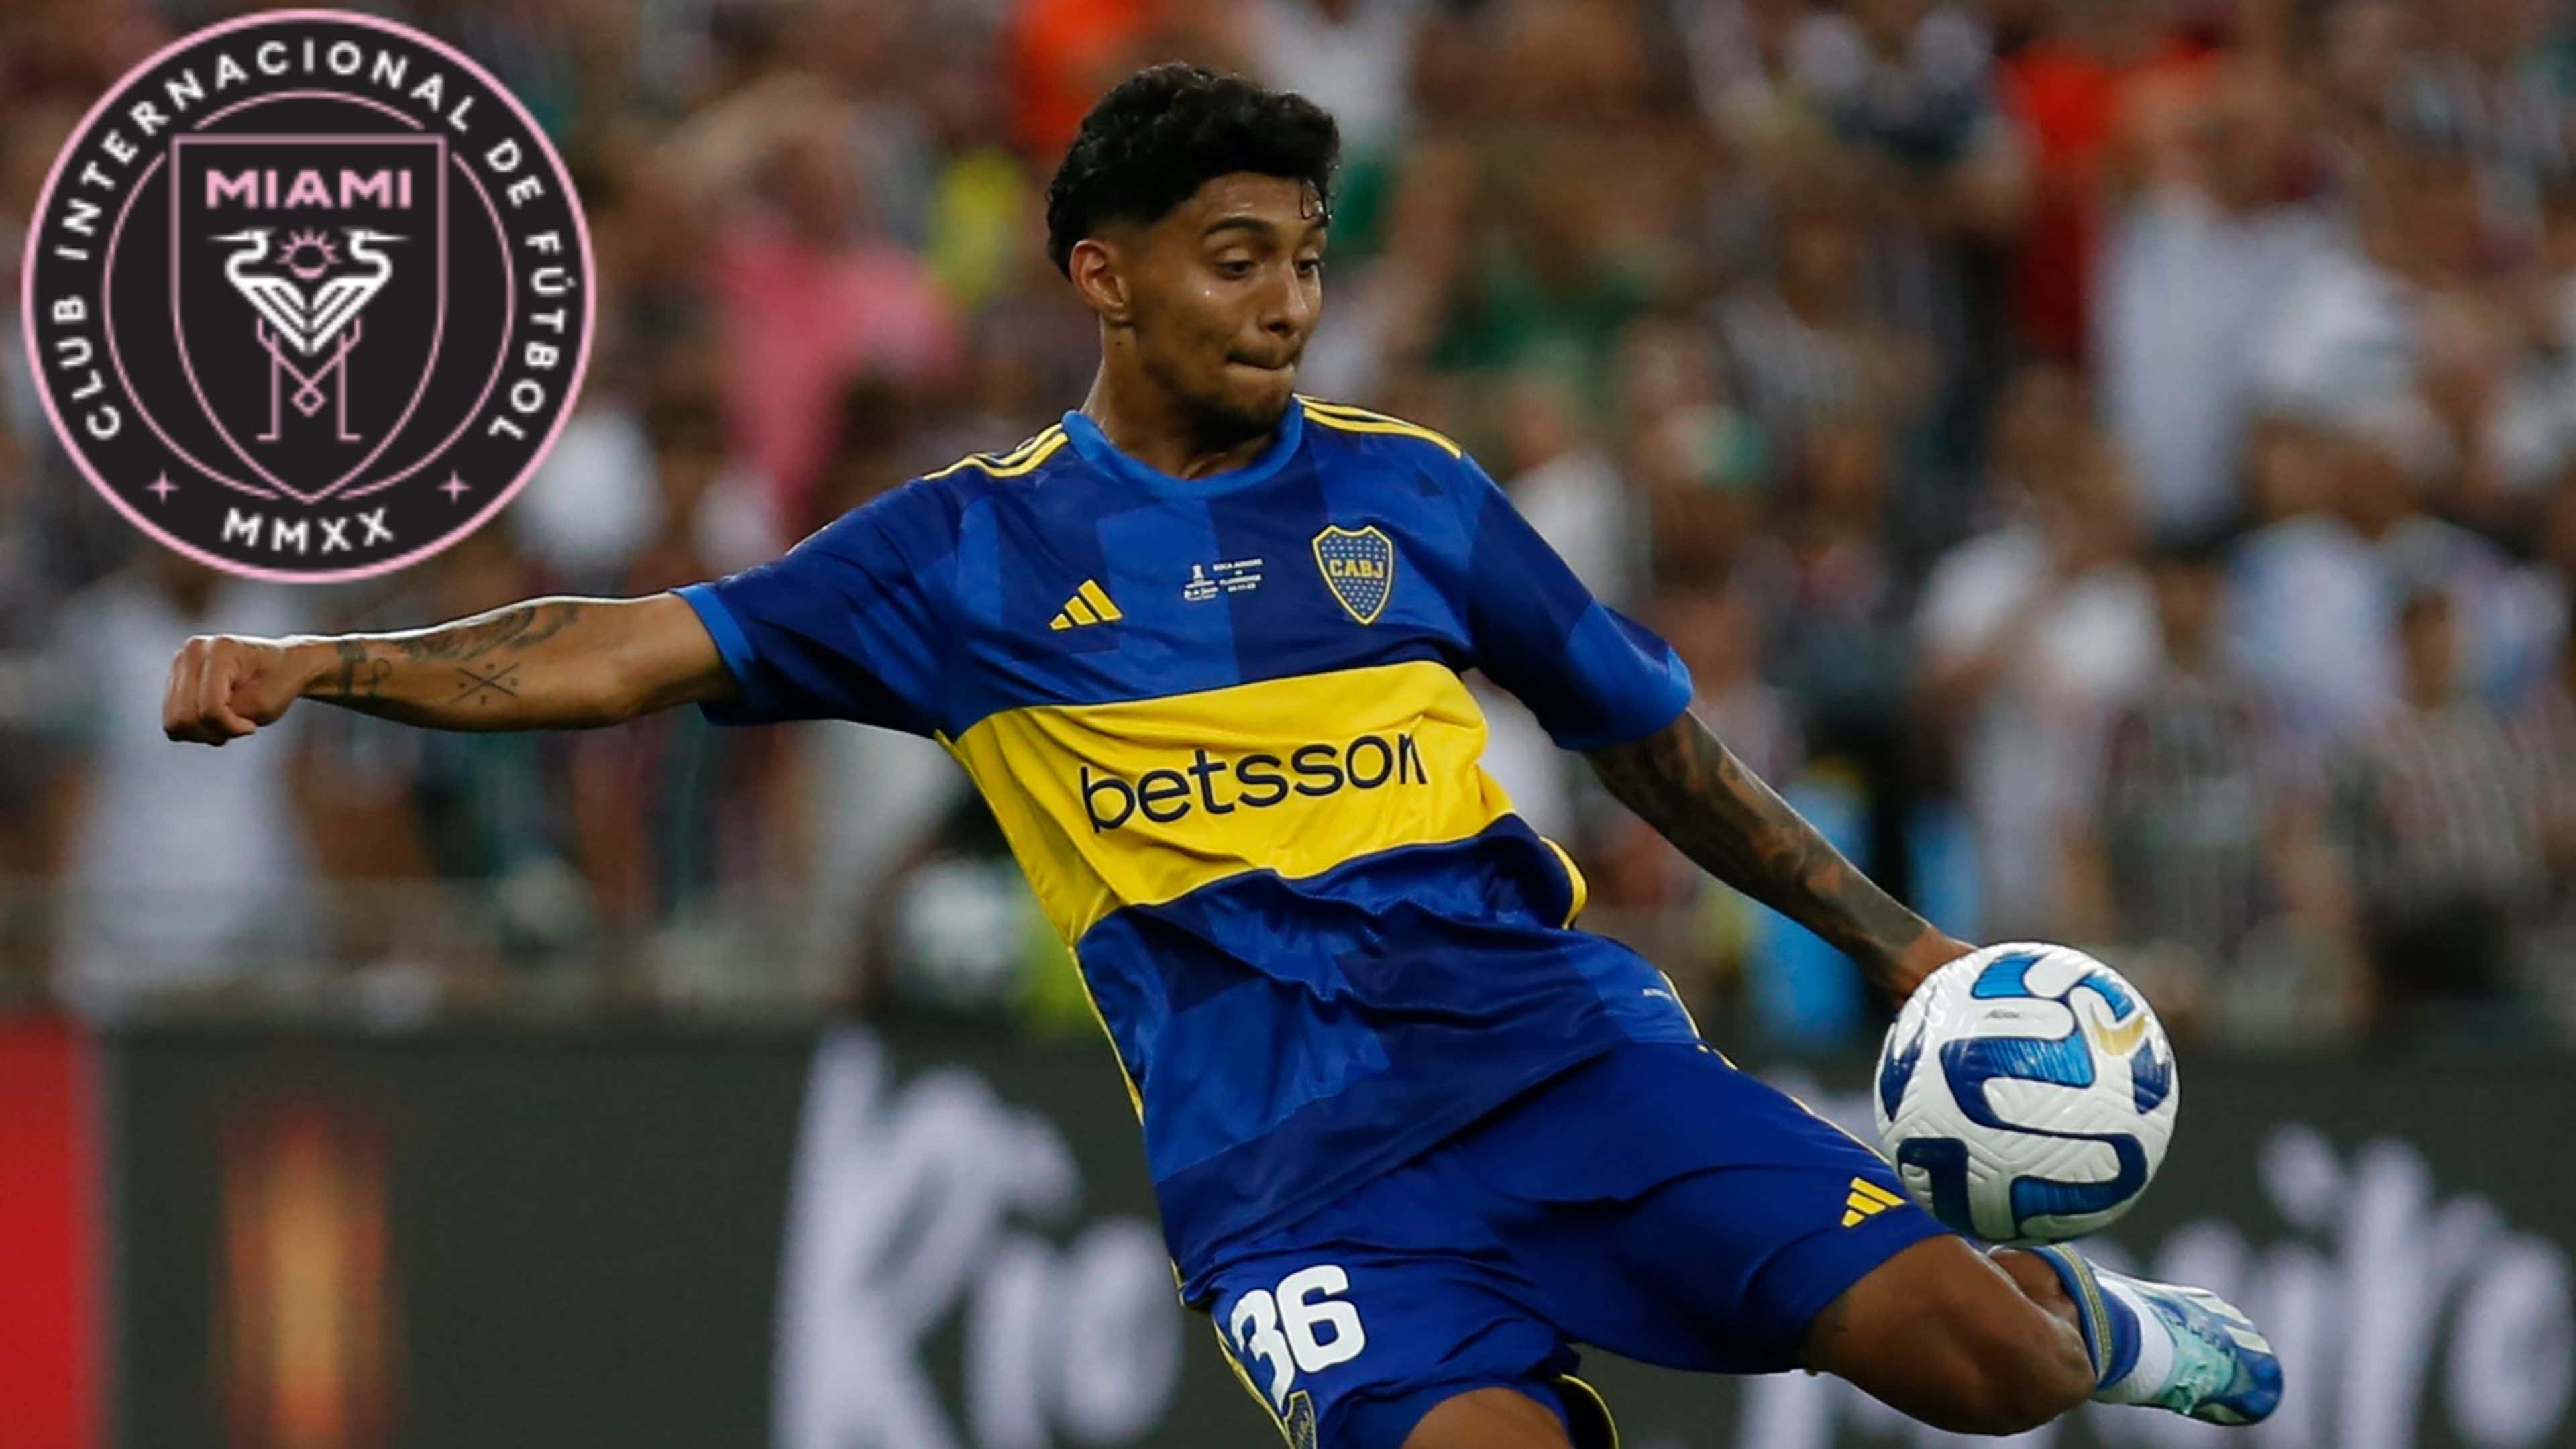 Romano] 🇦🇷 Botafogo sent new proposal to Boca Juniors for Cristian  Medina: $7m plus $2m with long term project including Palace or OL. Boca  Juniors rejected Botafogo's proposal. 🇺🇸 Understand Inter Miami